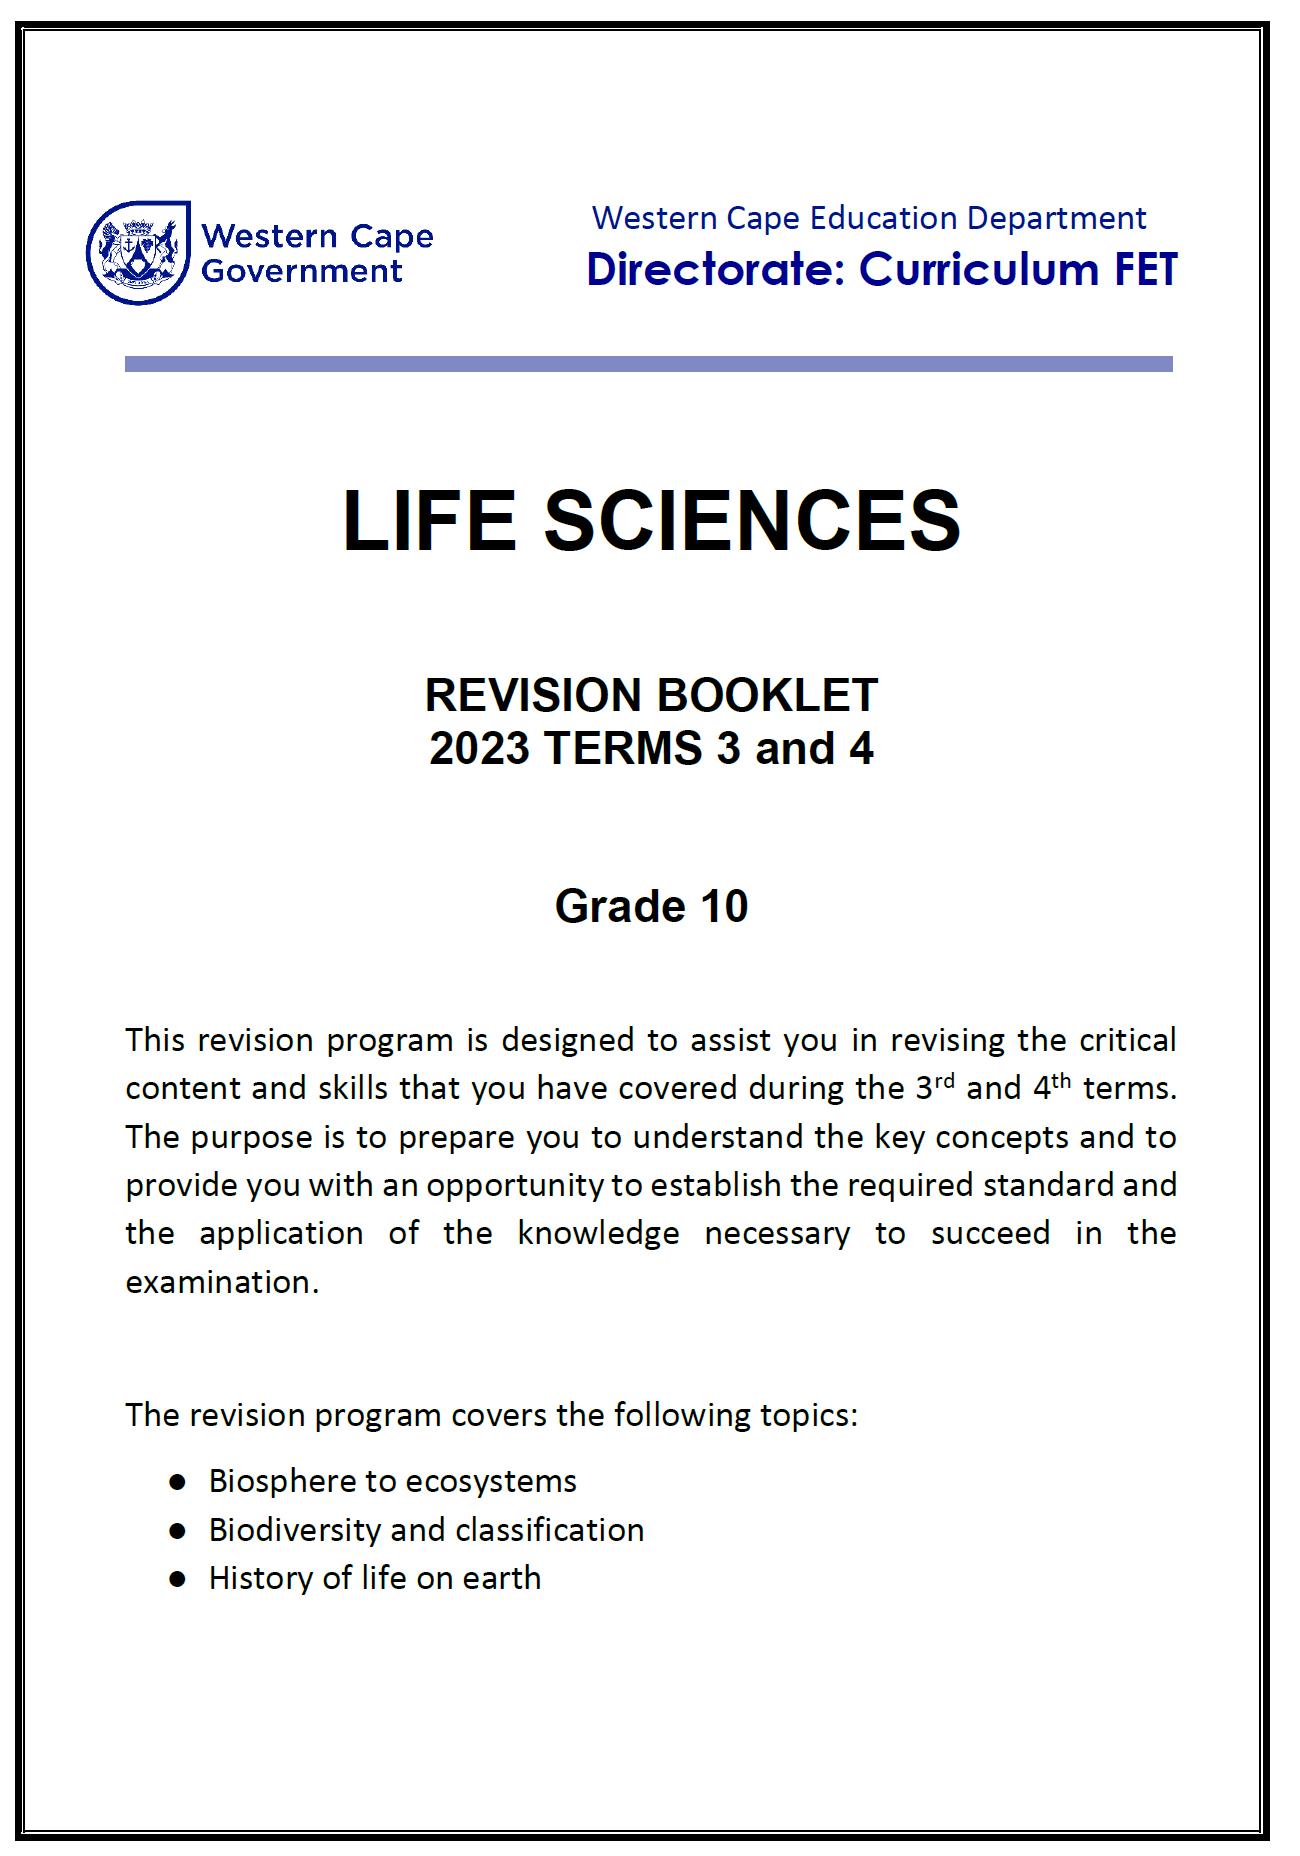 Life Sciences Grade 10 Revision Material Terms 3 And 4 2023 